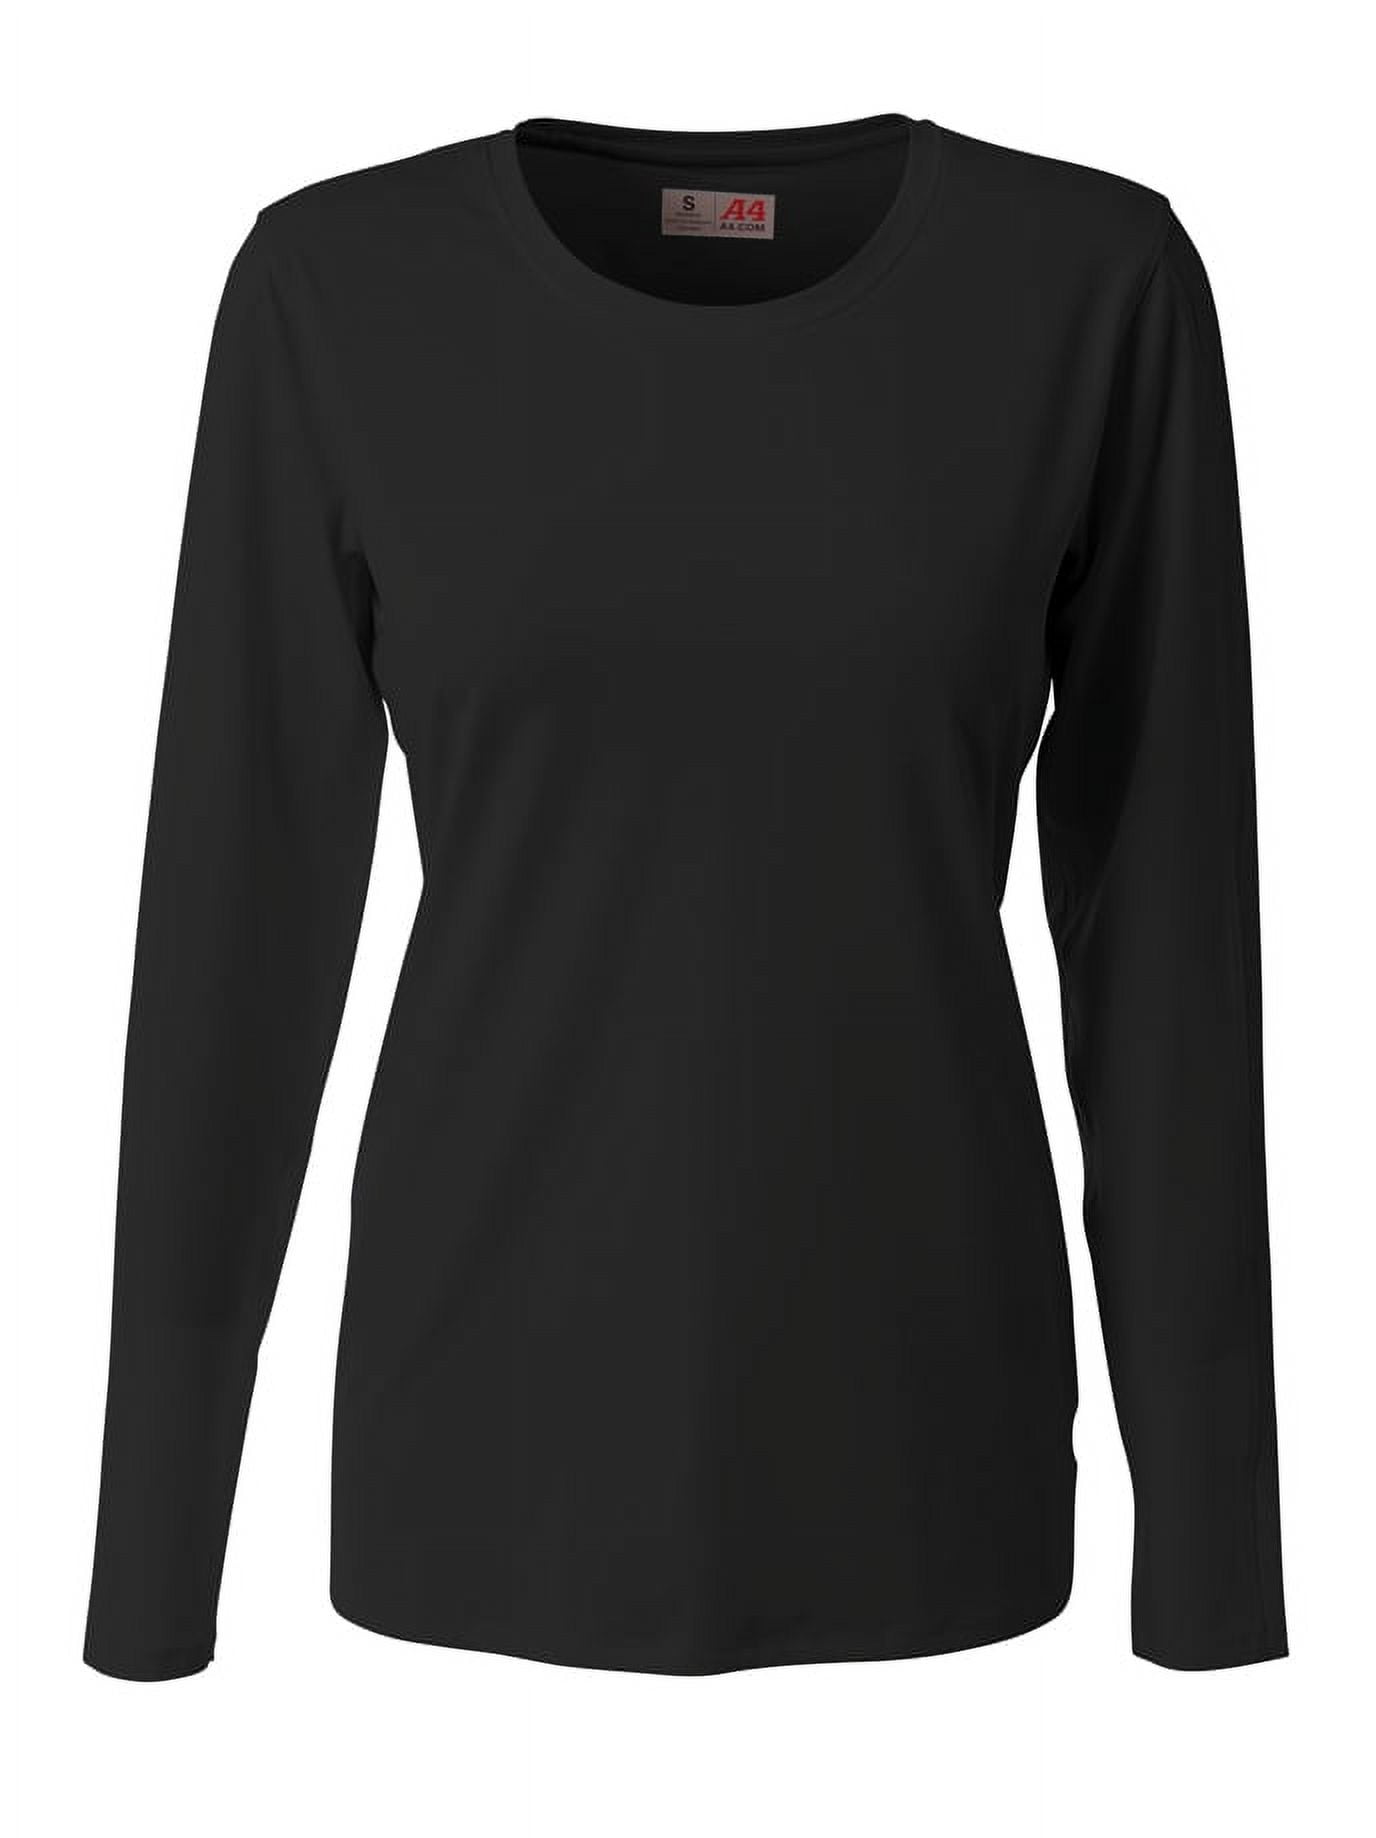 A4 Spike Long Sleeve Volleyball Jersey For Women in Black | NW3015 ...